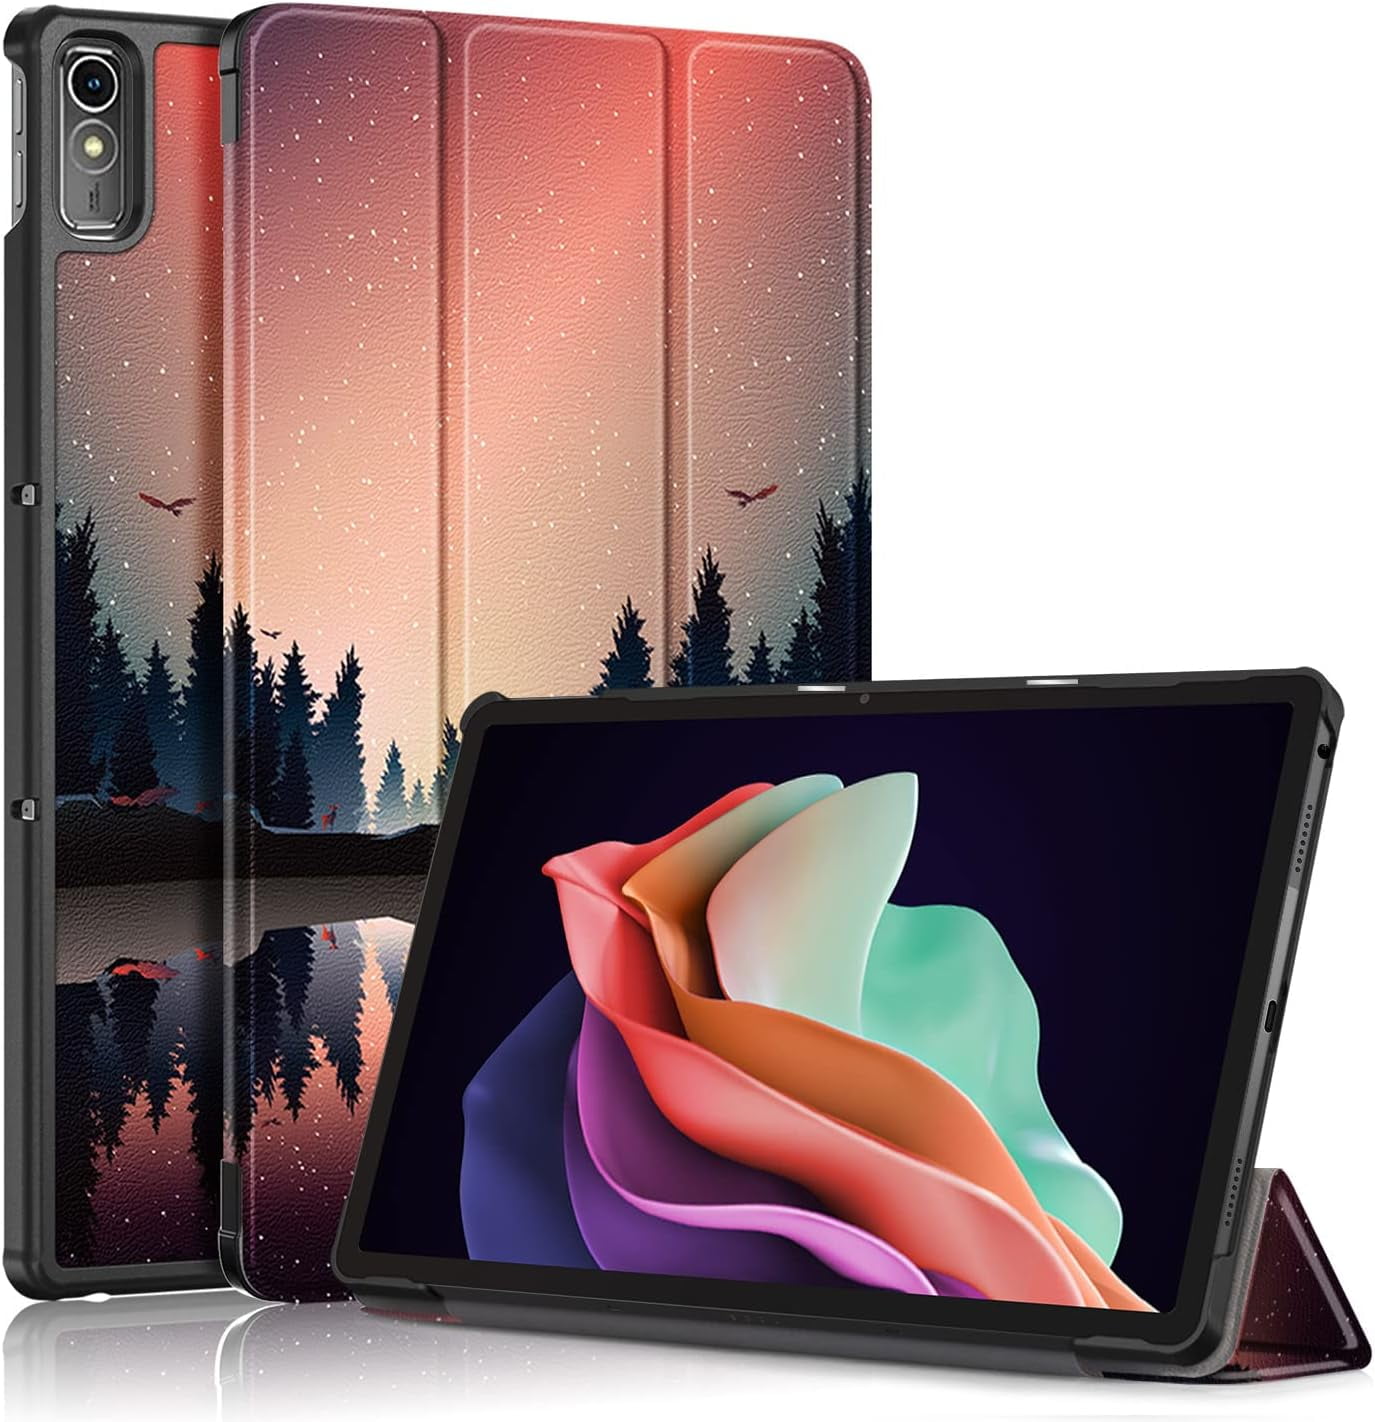 elitegadget Case for Lenovo Tab P11 Gen 2 (11.5 inch) TB-350FU/TB-350XC  Released in 2023 - Trifold Shell Slim Lightweight Stand Auto Wake/Sleep  Folio Cover Case (Forest Dusk)